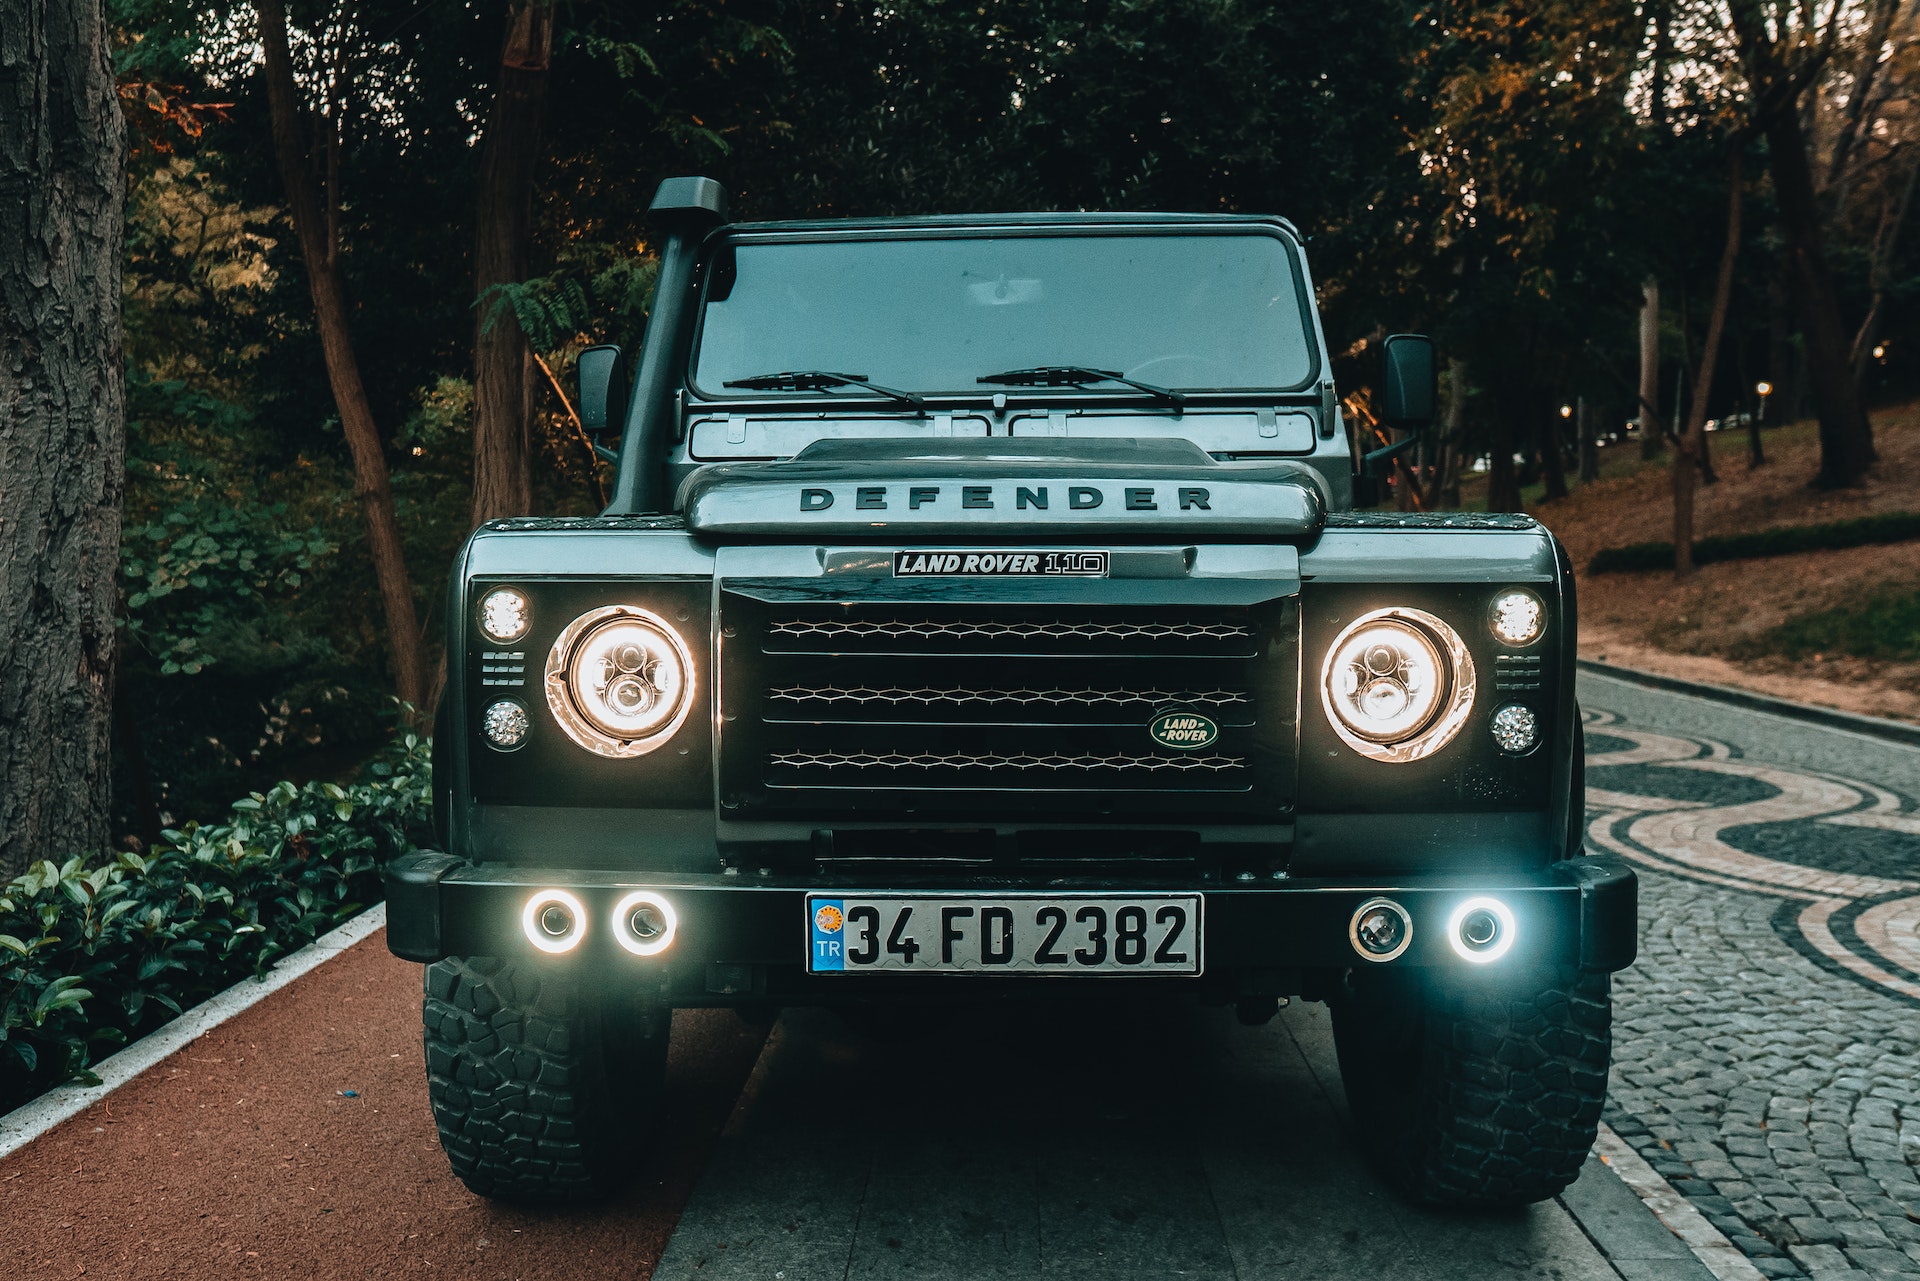 Land Rover Defender front view